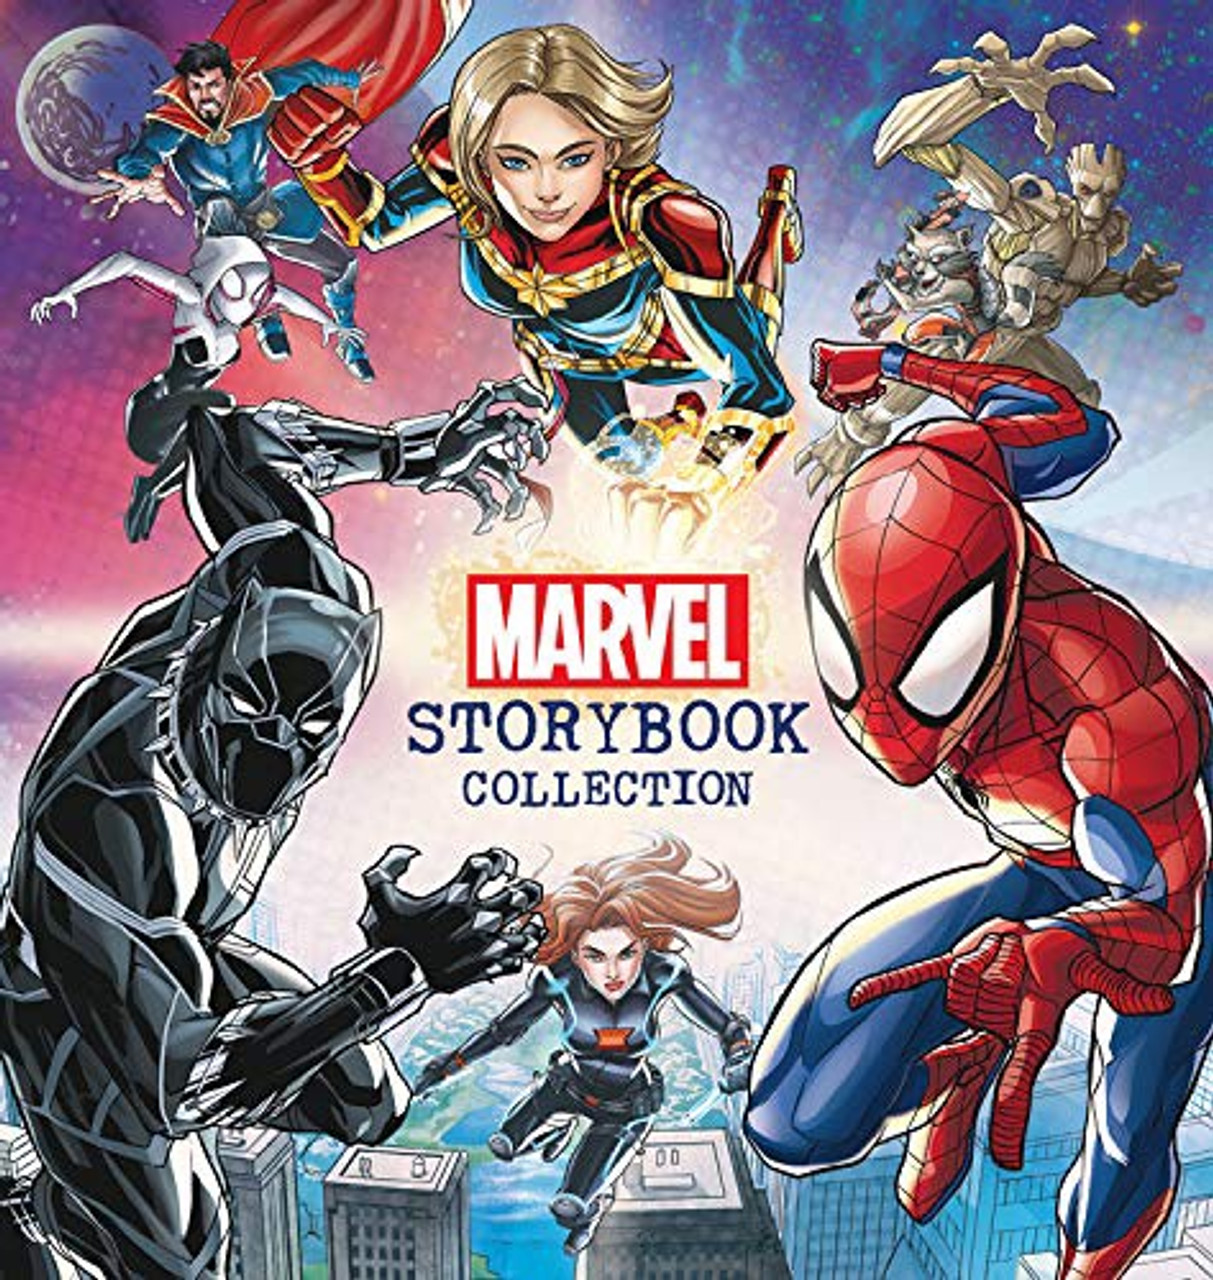 MARVEL STORYBOOK COLLECTION HB